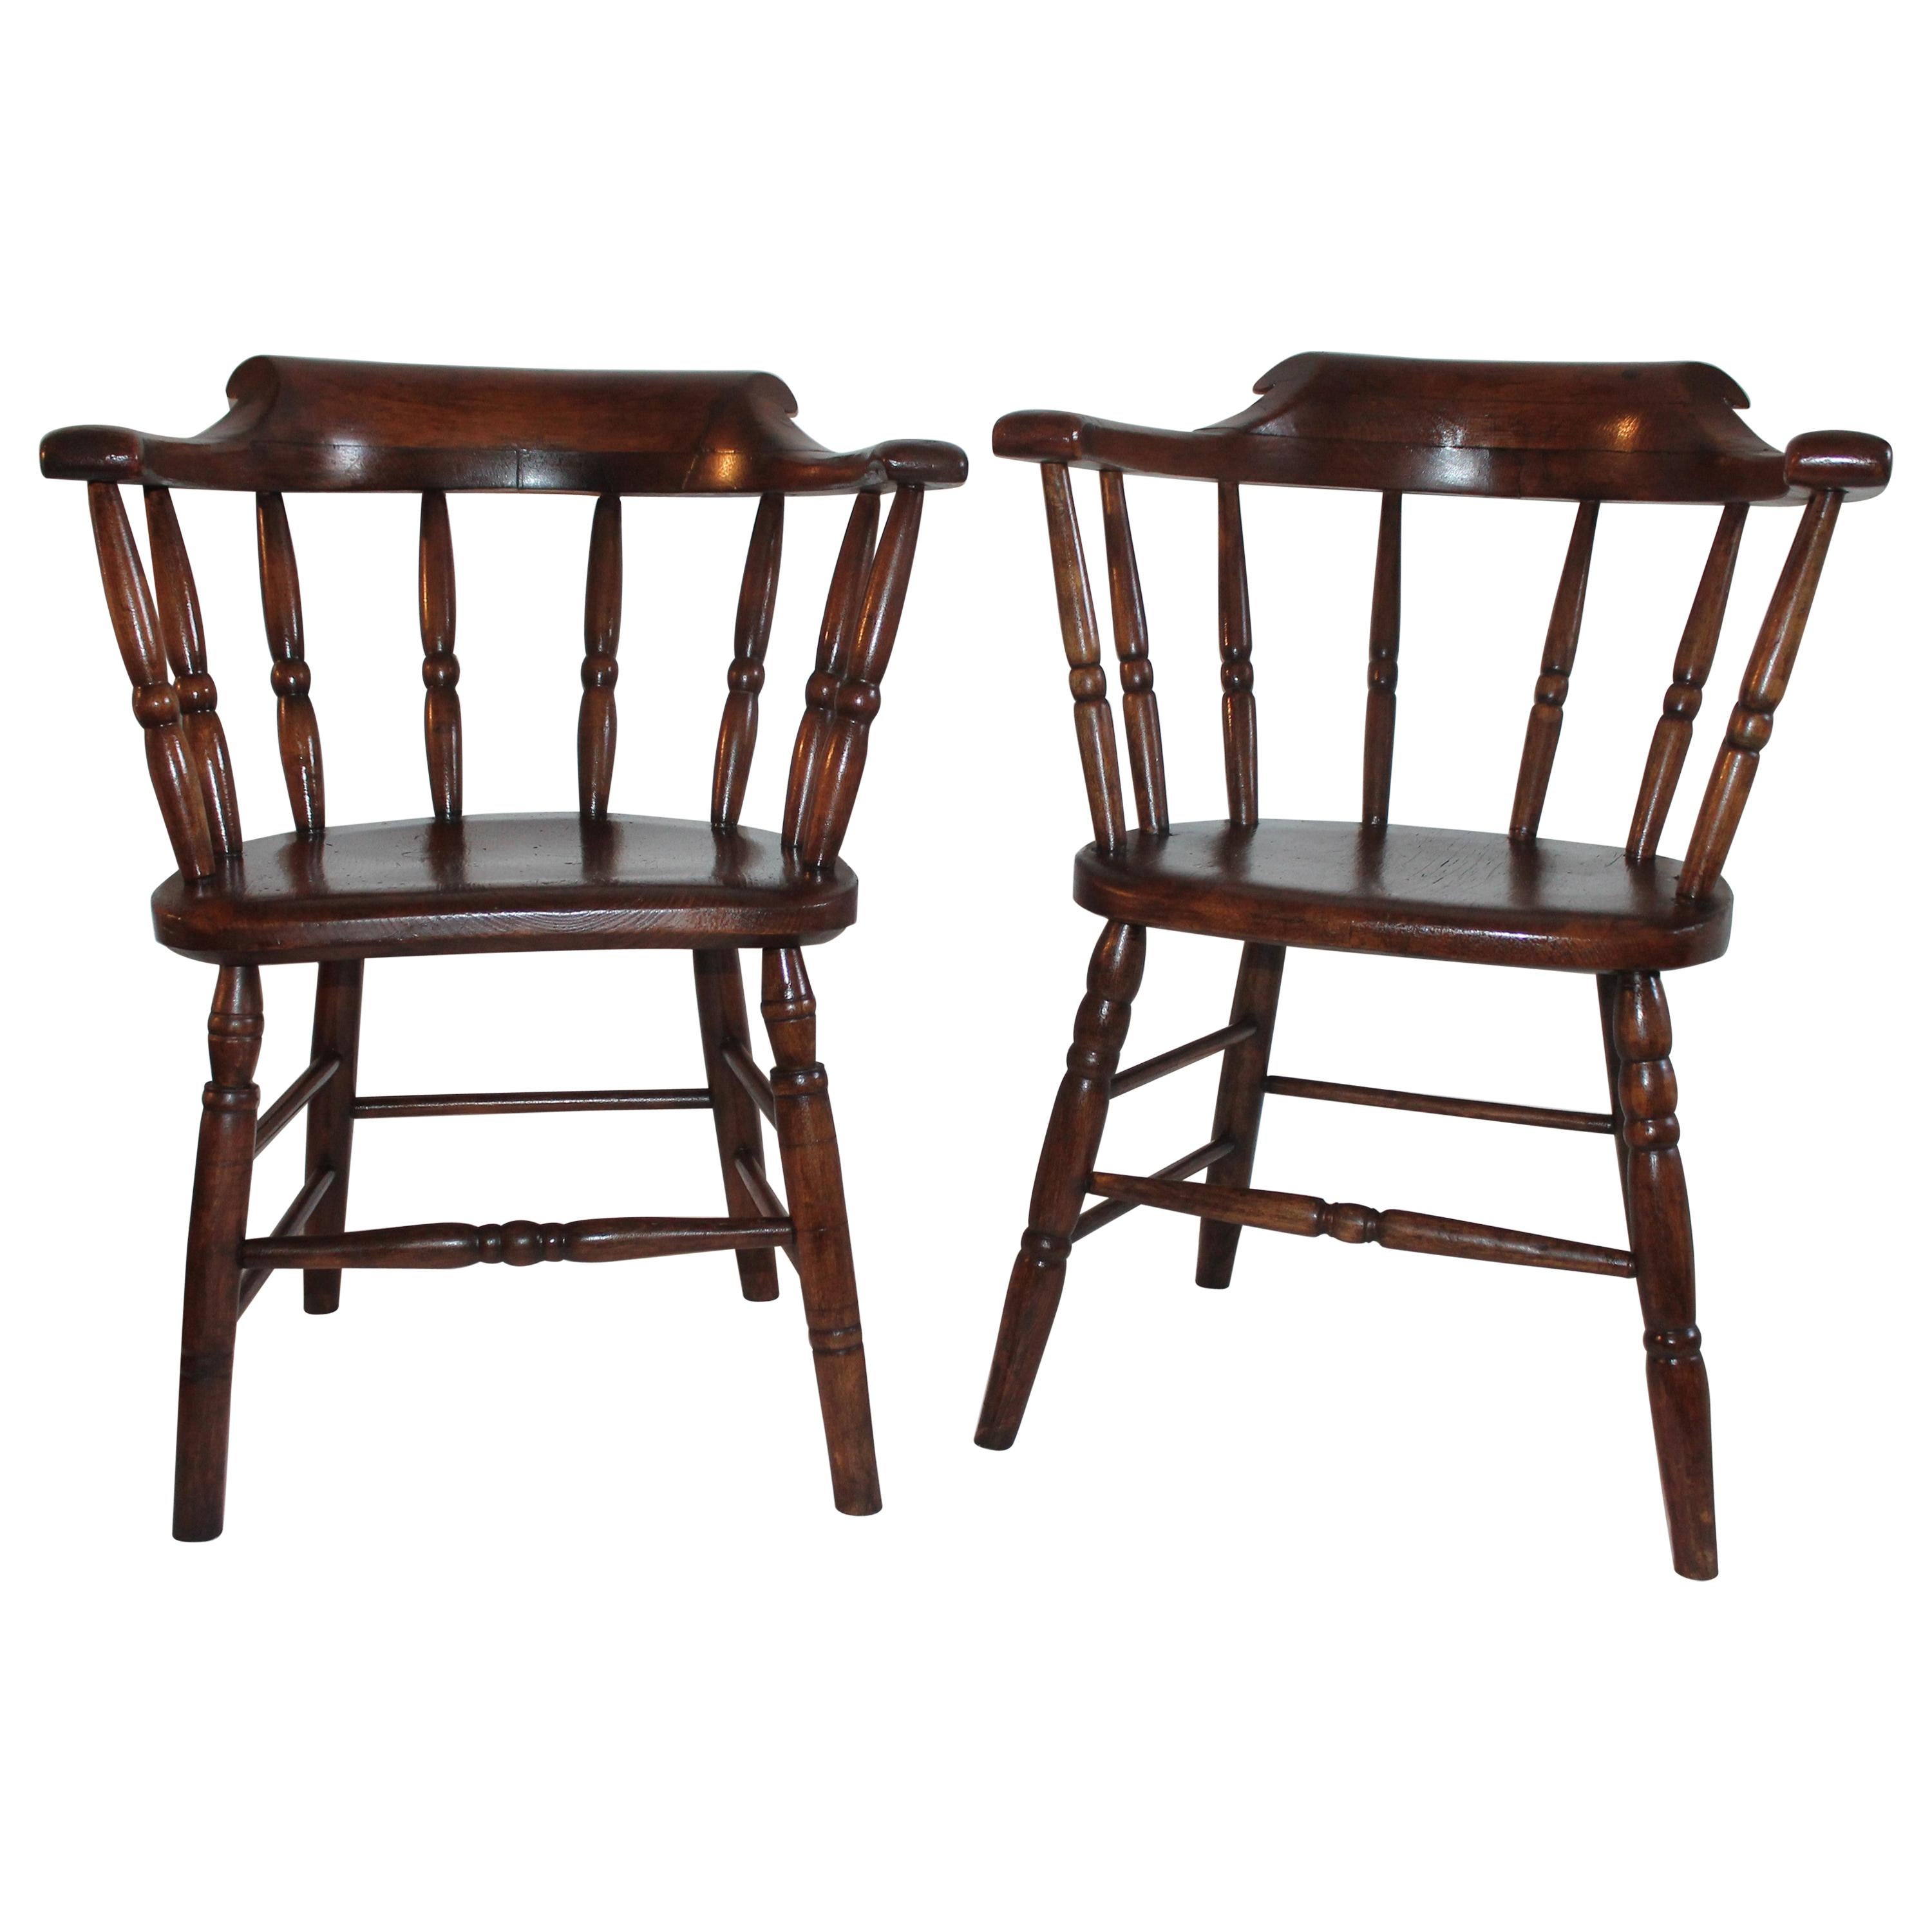 19th Century Fire House Windsor Captain’s Chairs, Pair